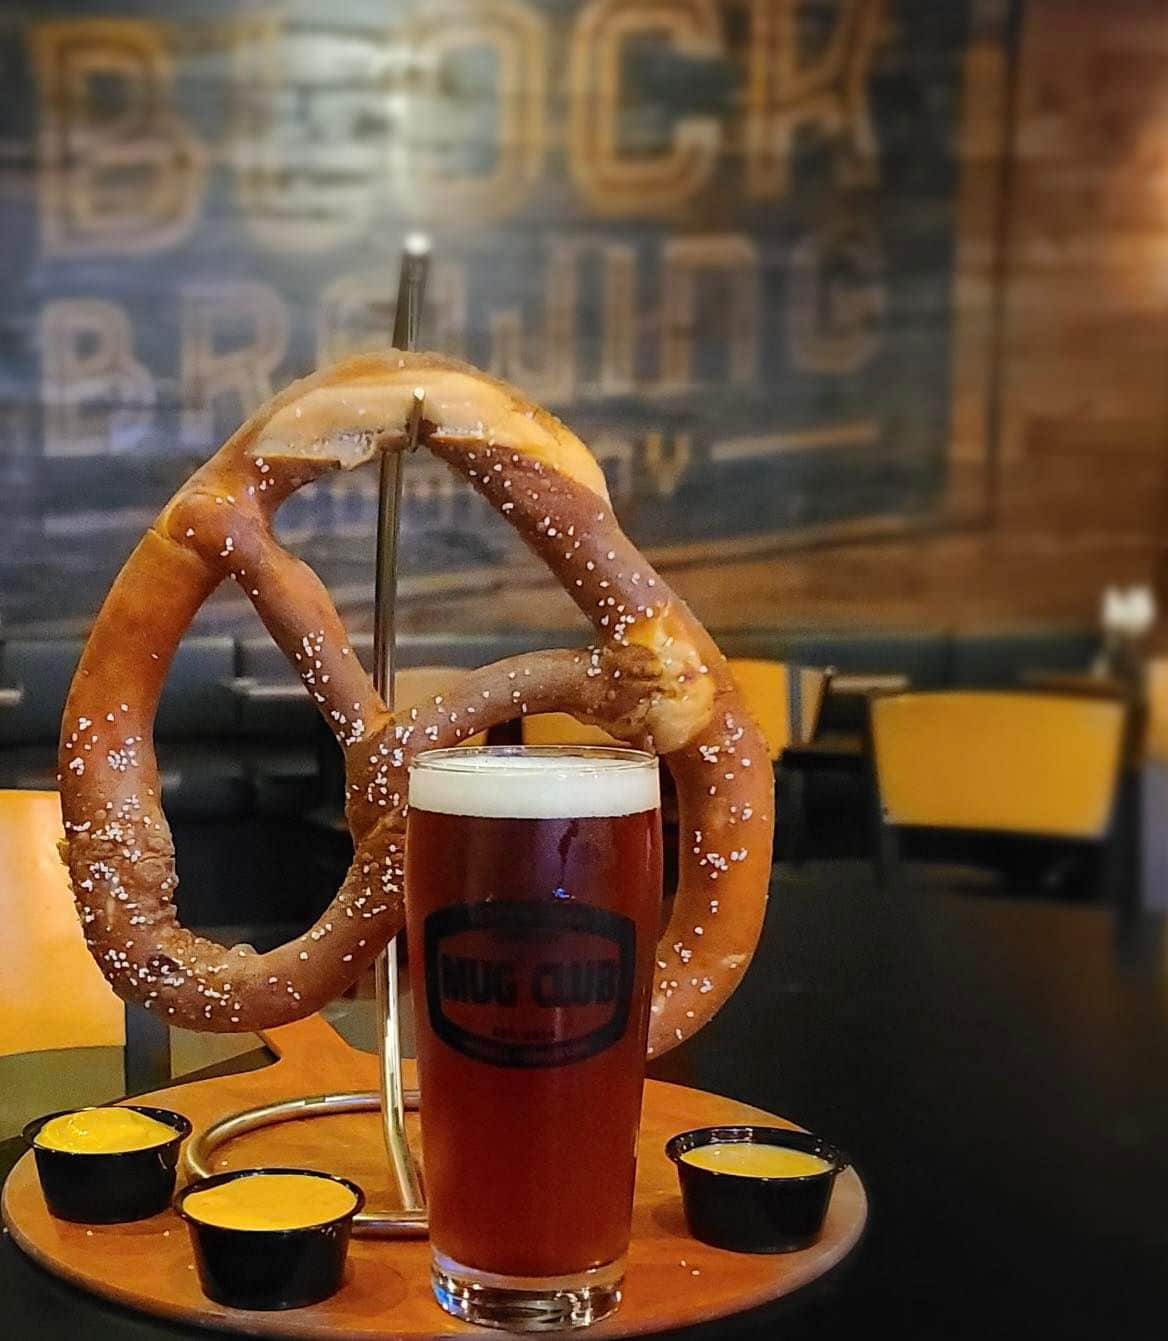 It's that time of the year and Blocktoberfest is here!!! Blocktoberfest is